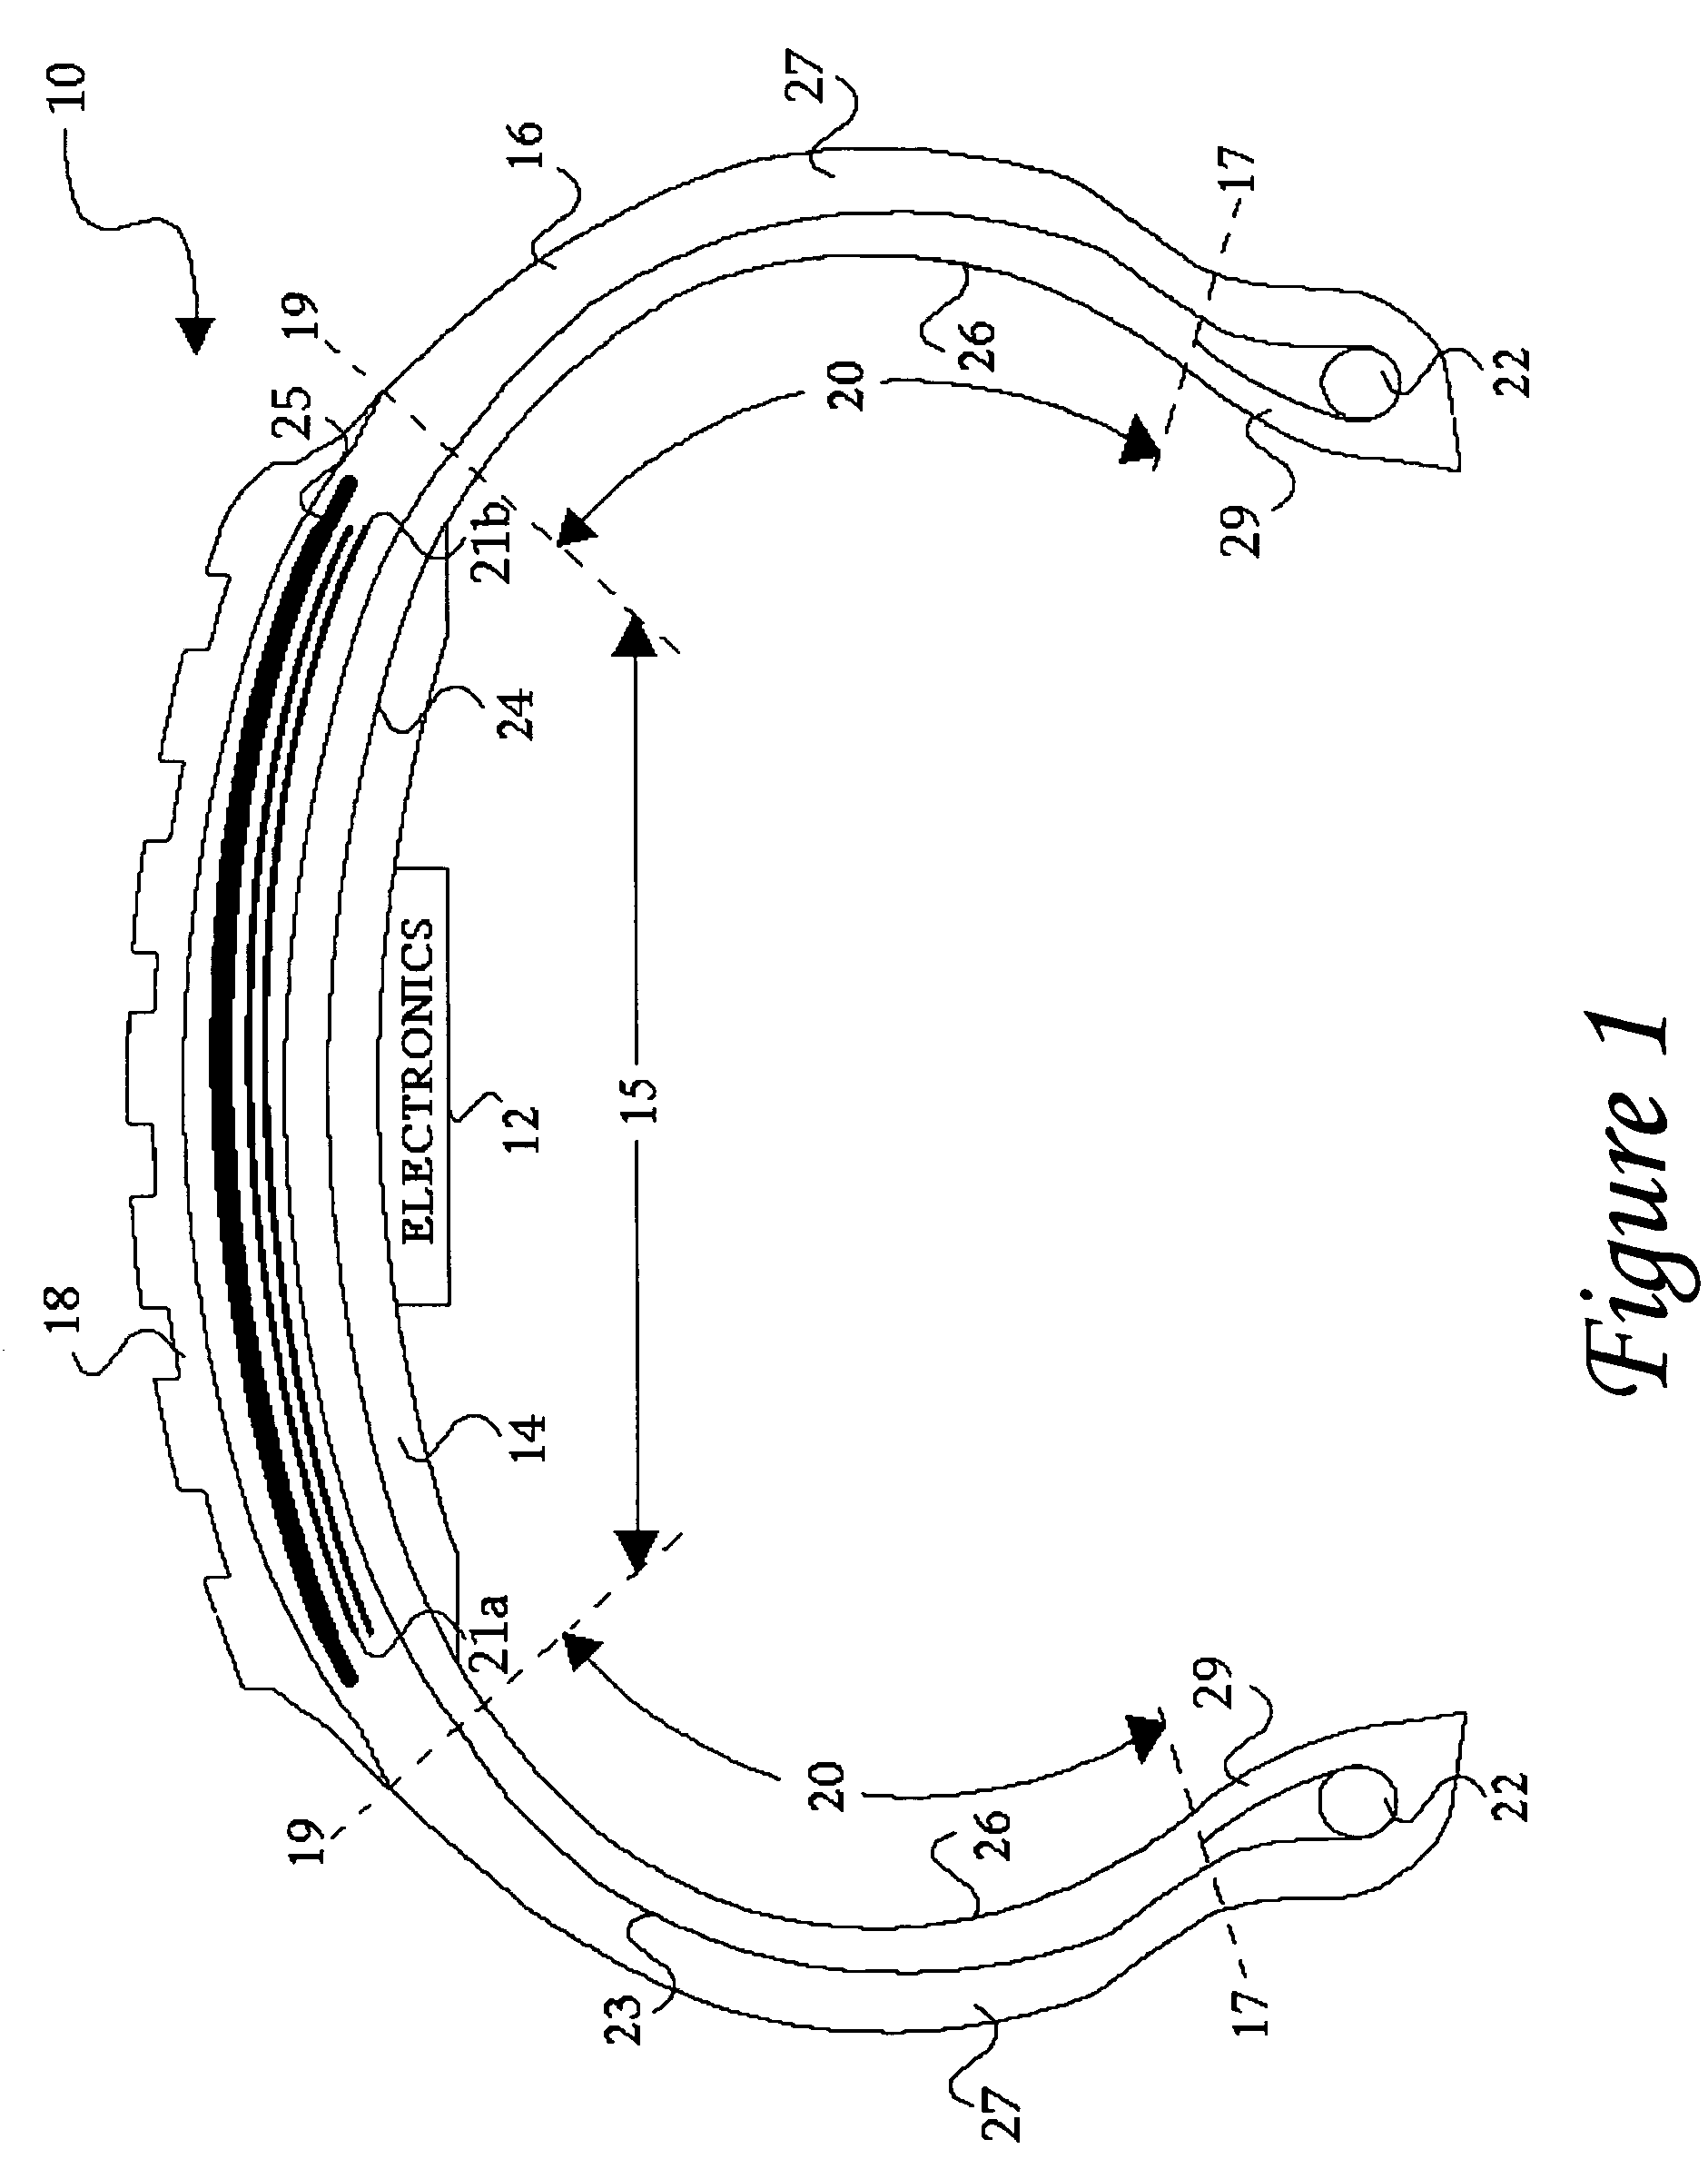 System and method for generating electric power from a rotating tire's mechanical energy